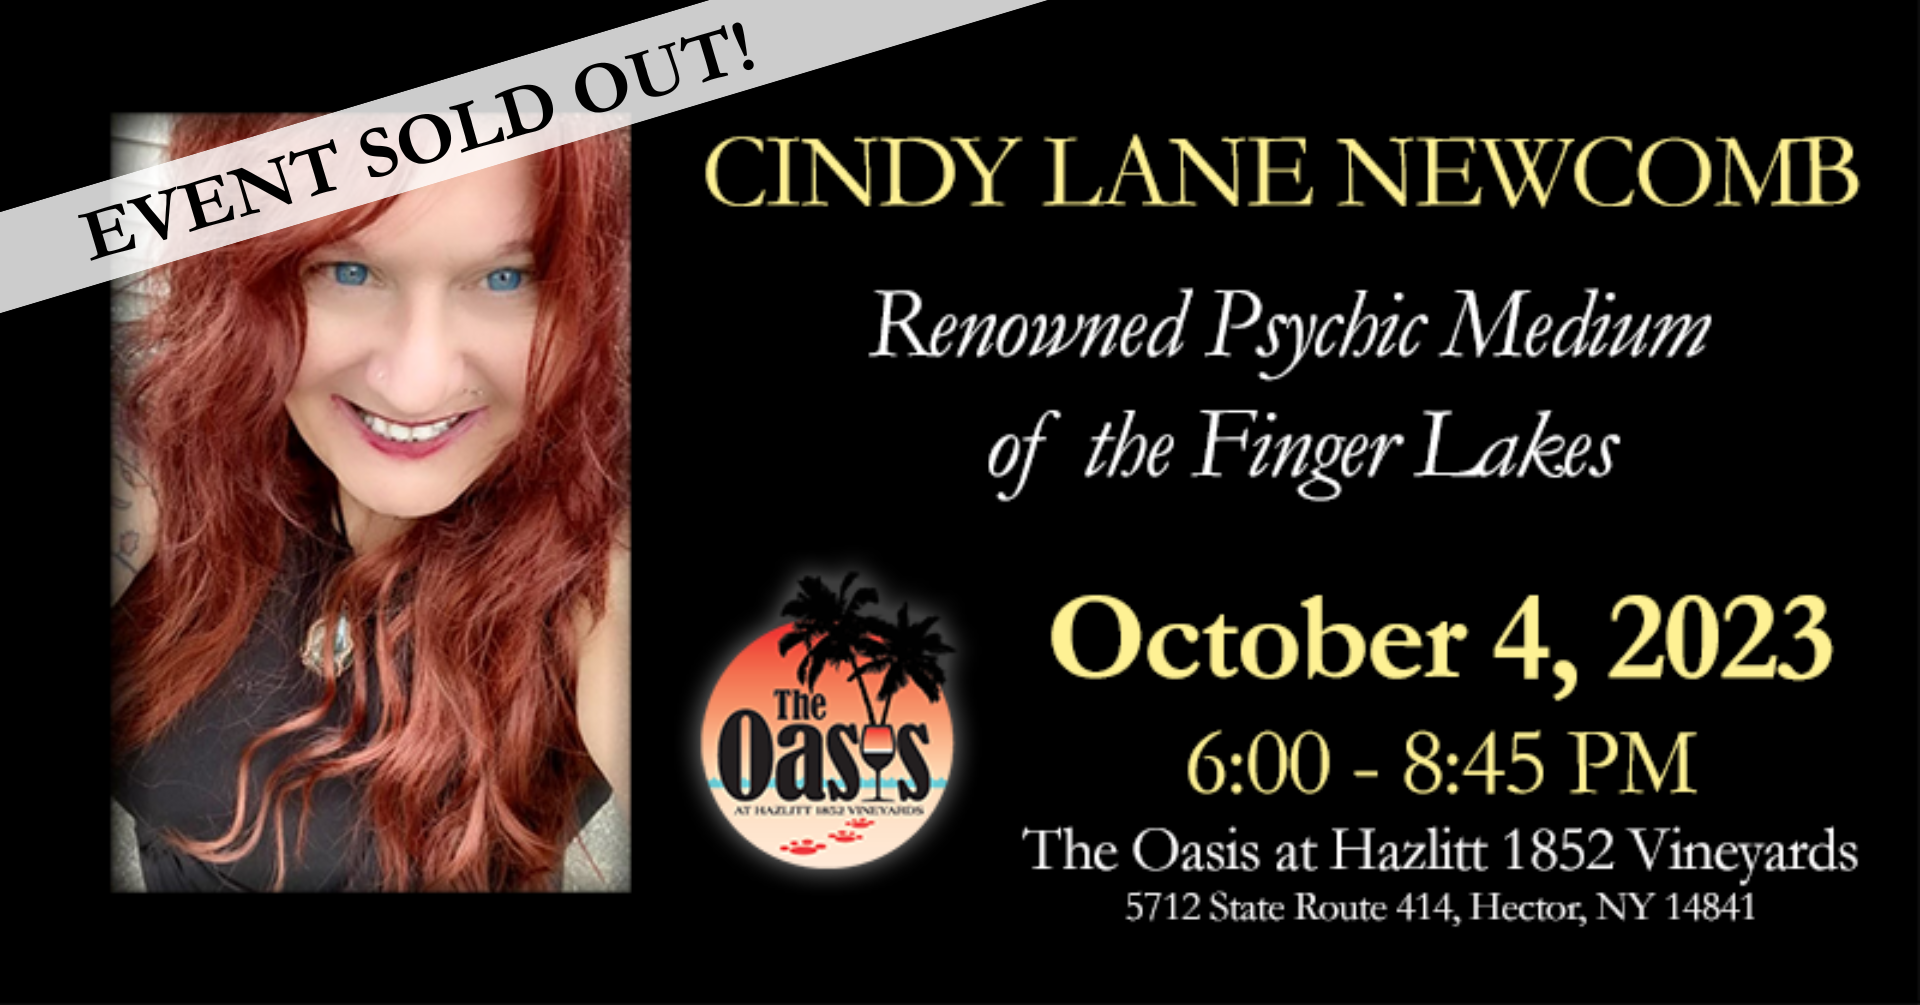 Sold Out. Cindy Lane Newcomb Renowned Psychic Medium of the Finger Lakes October 4 2023, 6-8:45 PM at the Oasis.